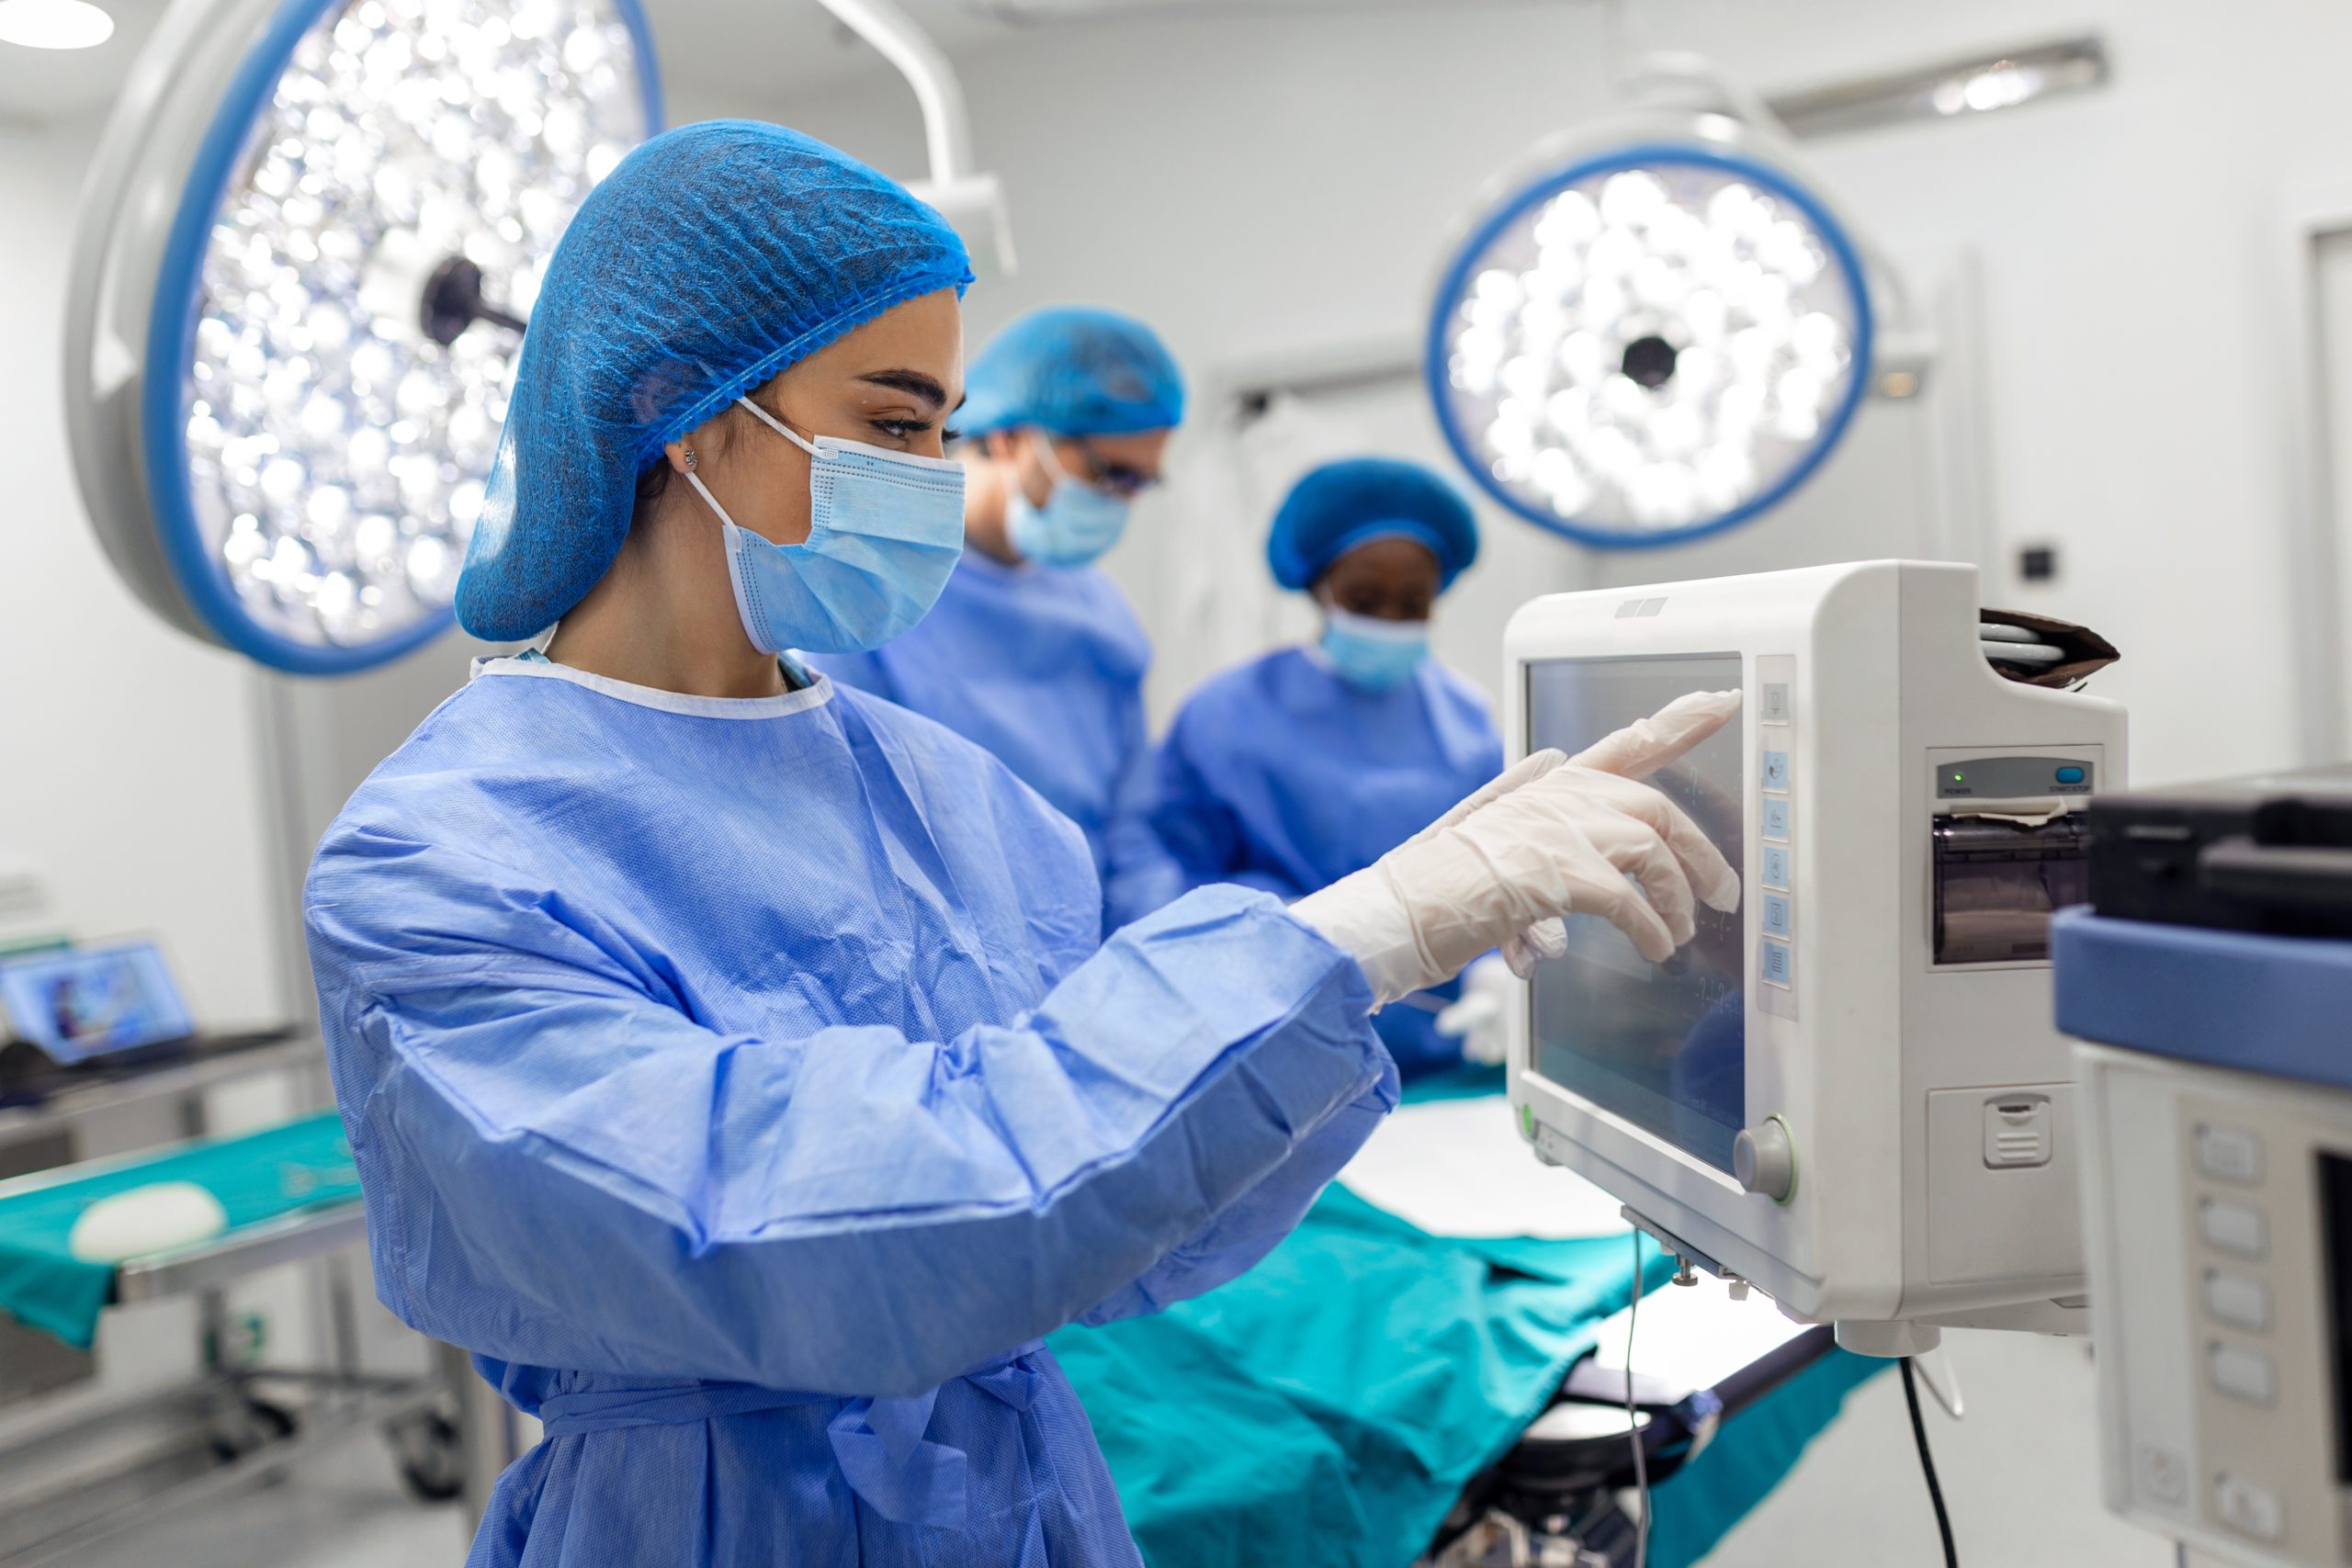 Post-pandemic growth in Asia-Pacific’s surgical device market